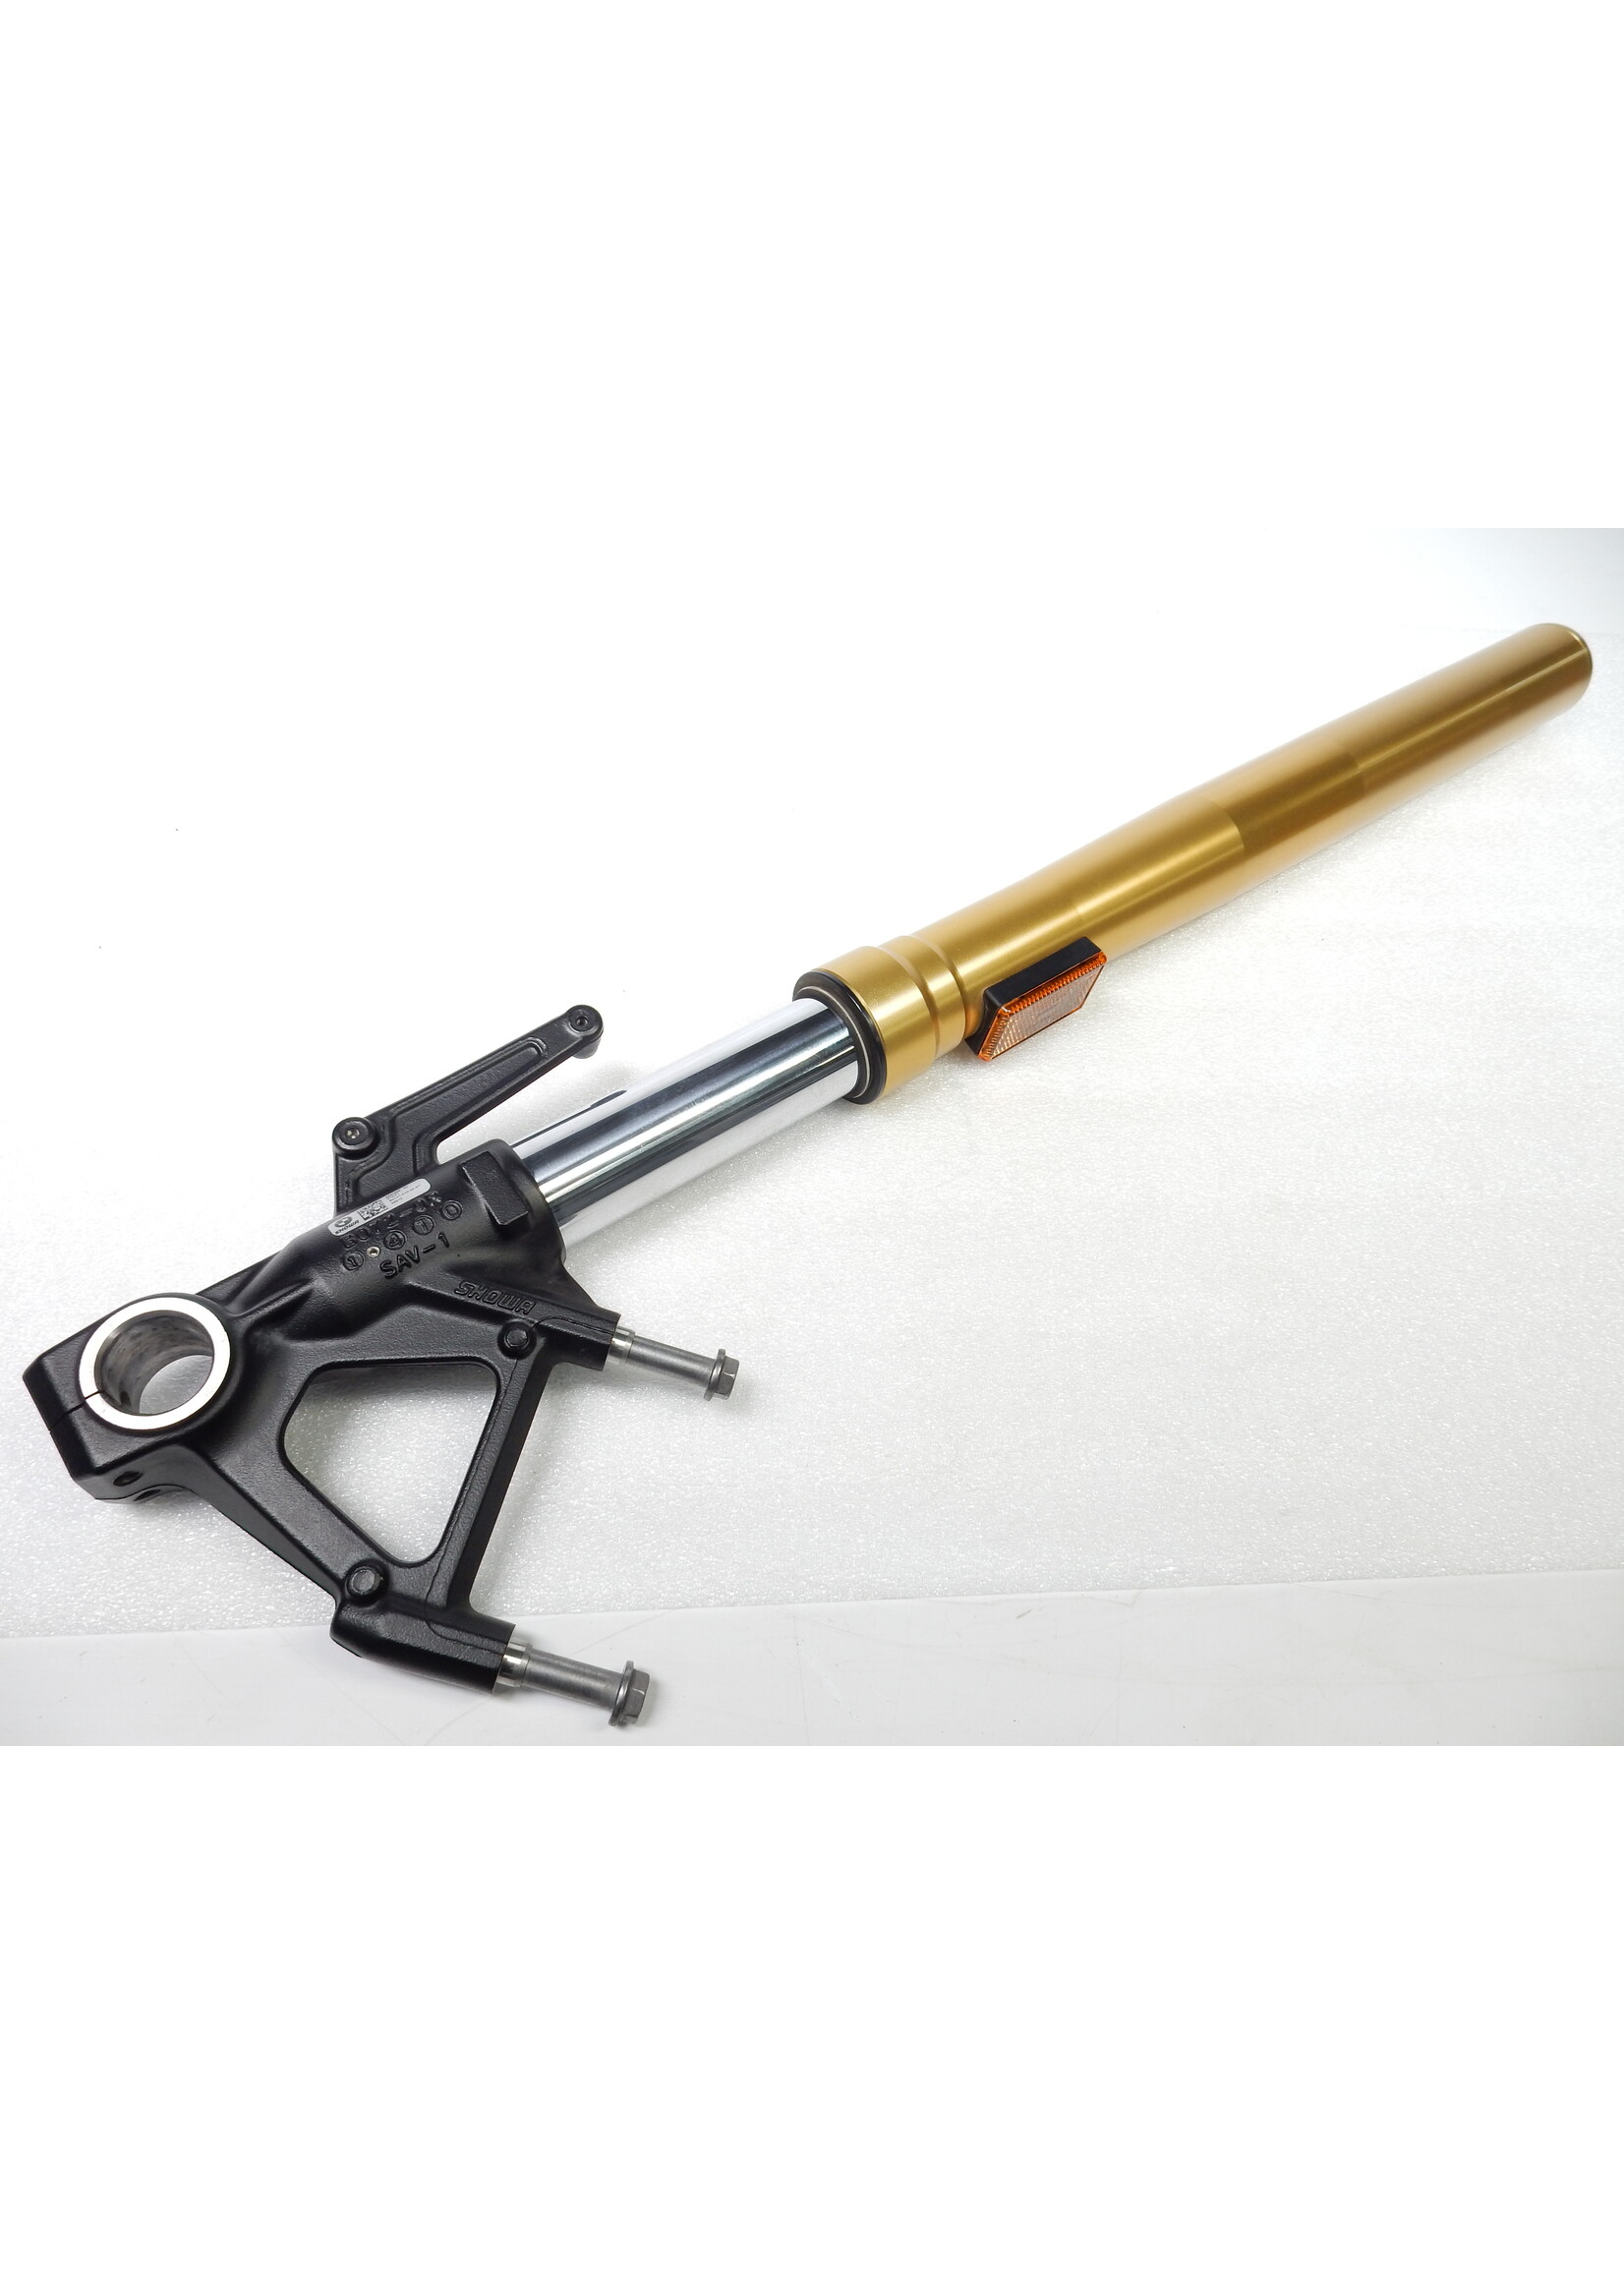 BMW BMW F 900 R Fork stanchion, gold, right / 31429467896